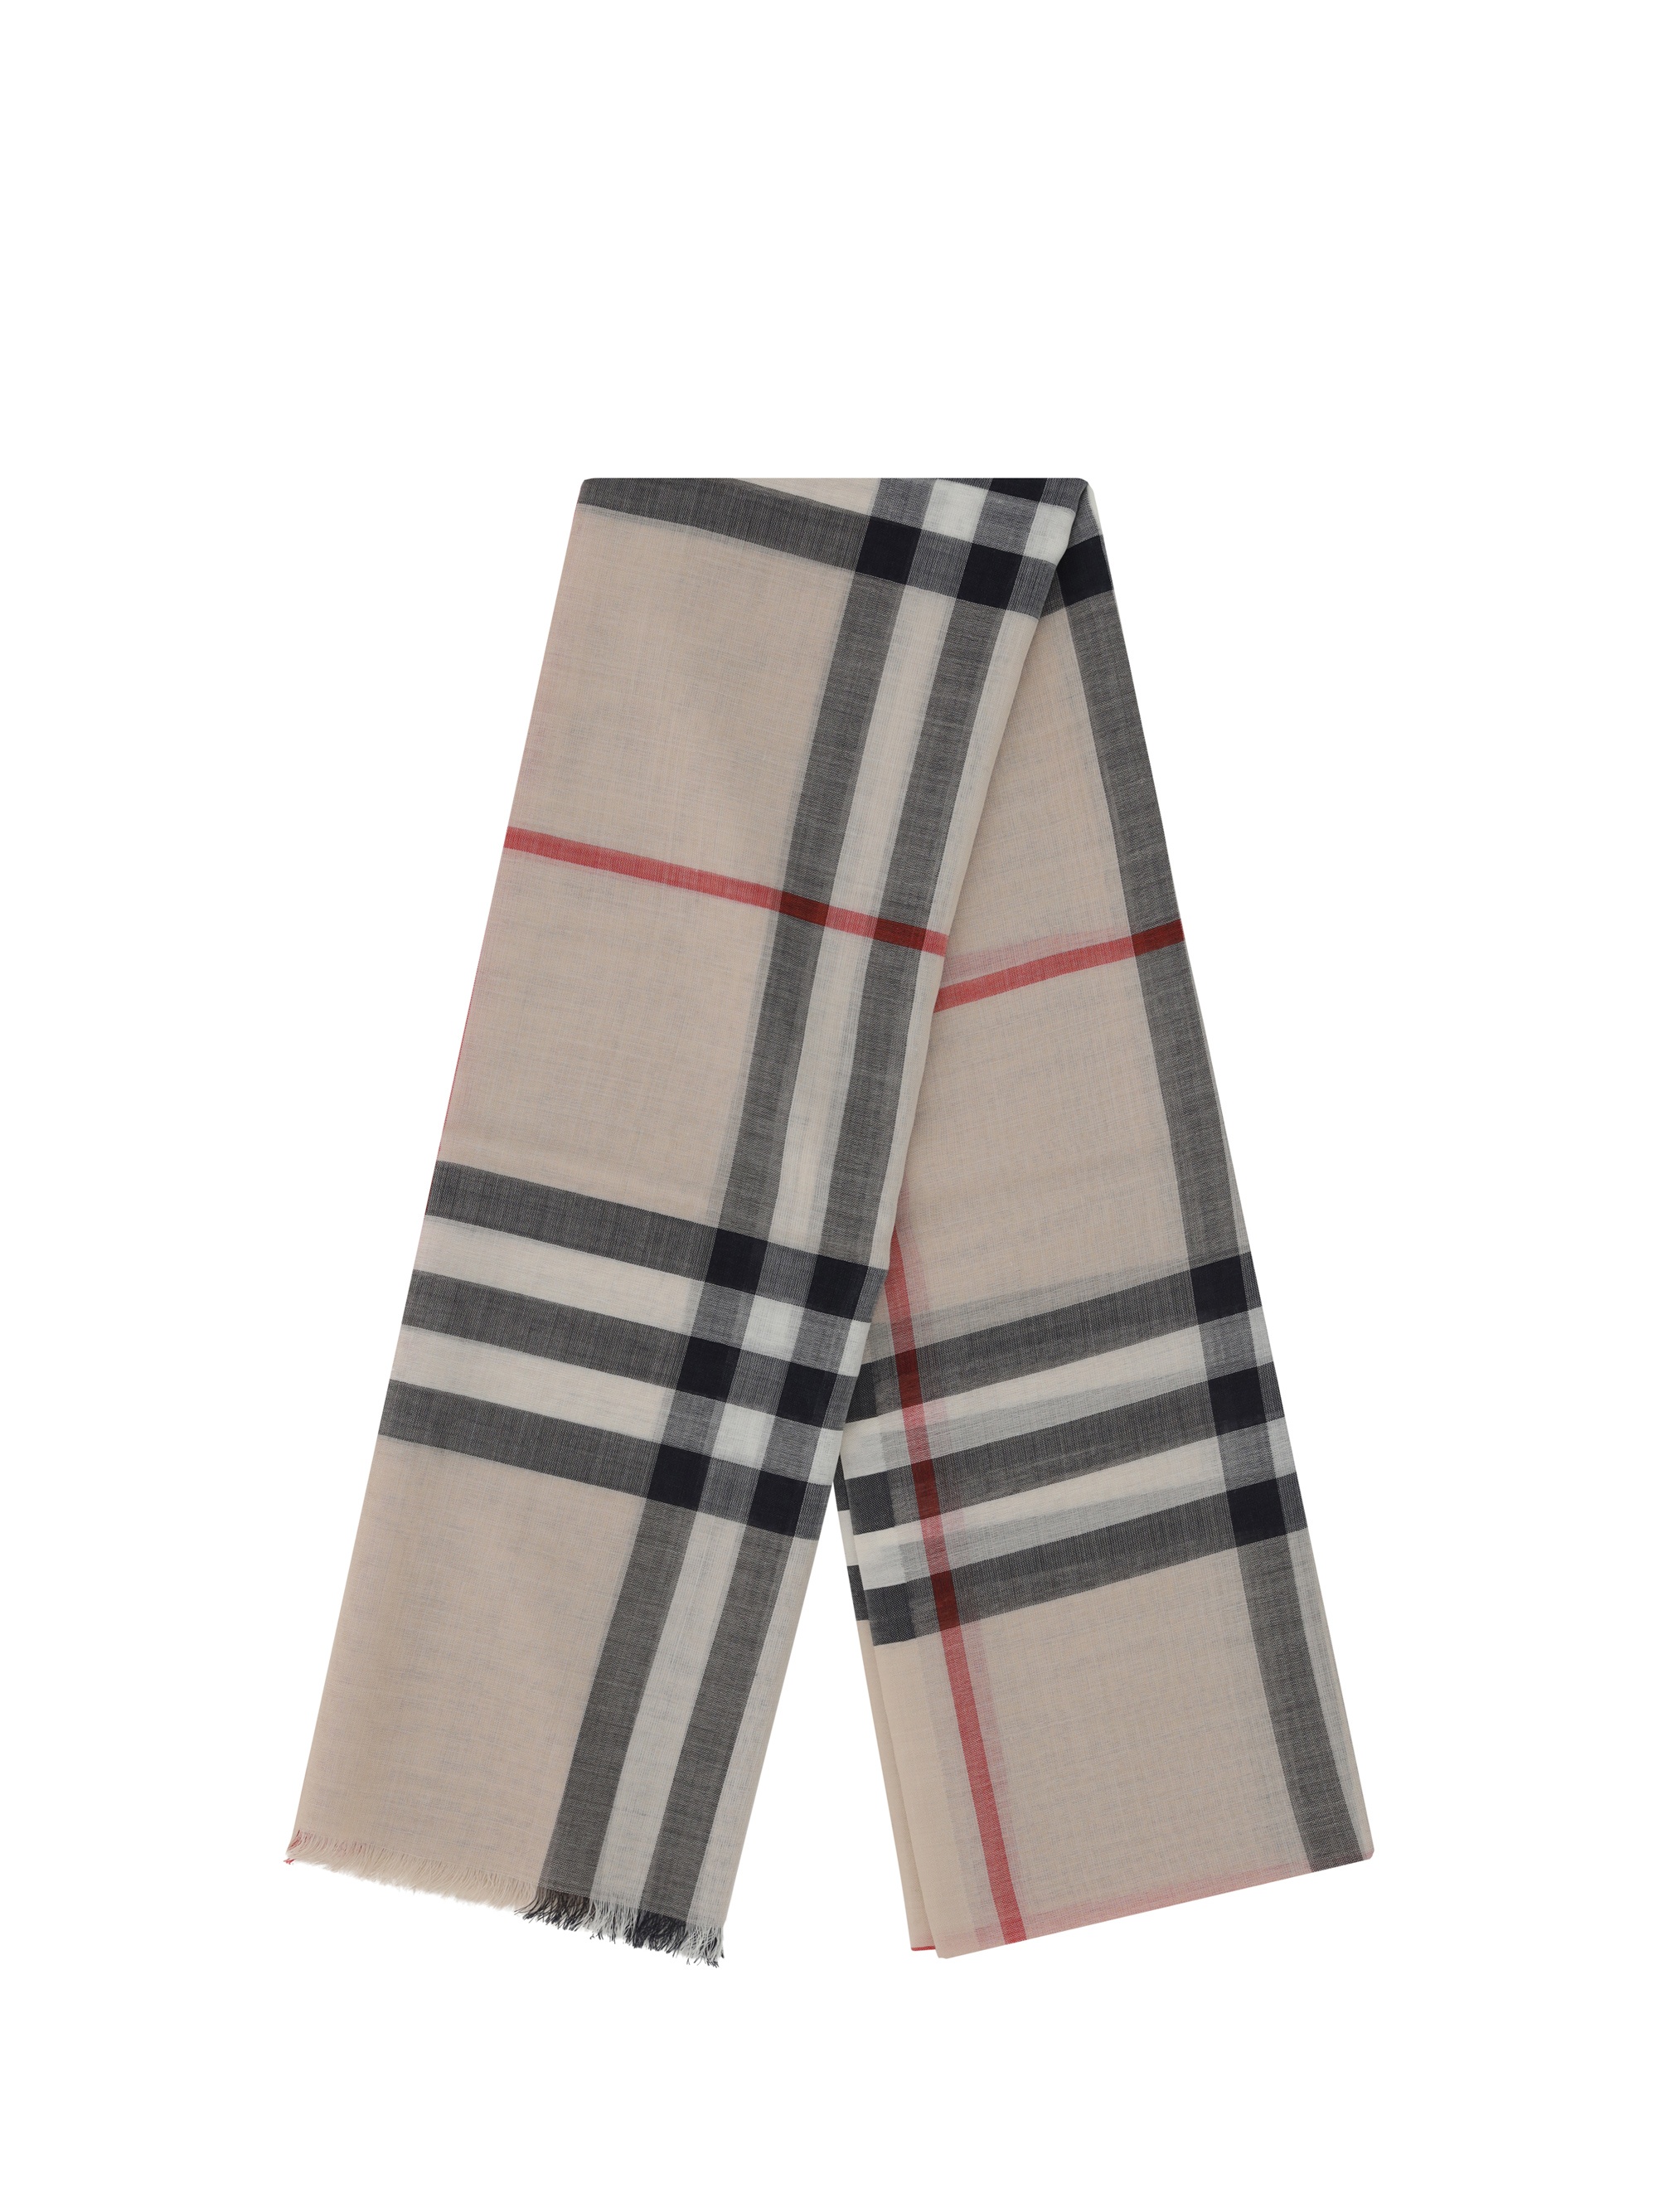 BURBERRY- Giant Check Wool Blend Scarf- Woman- Uni - Beige